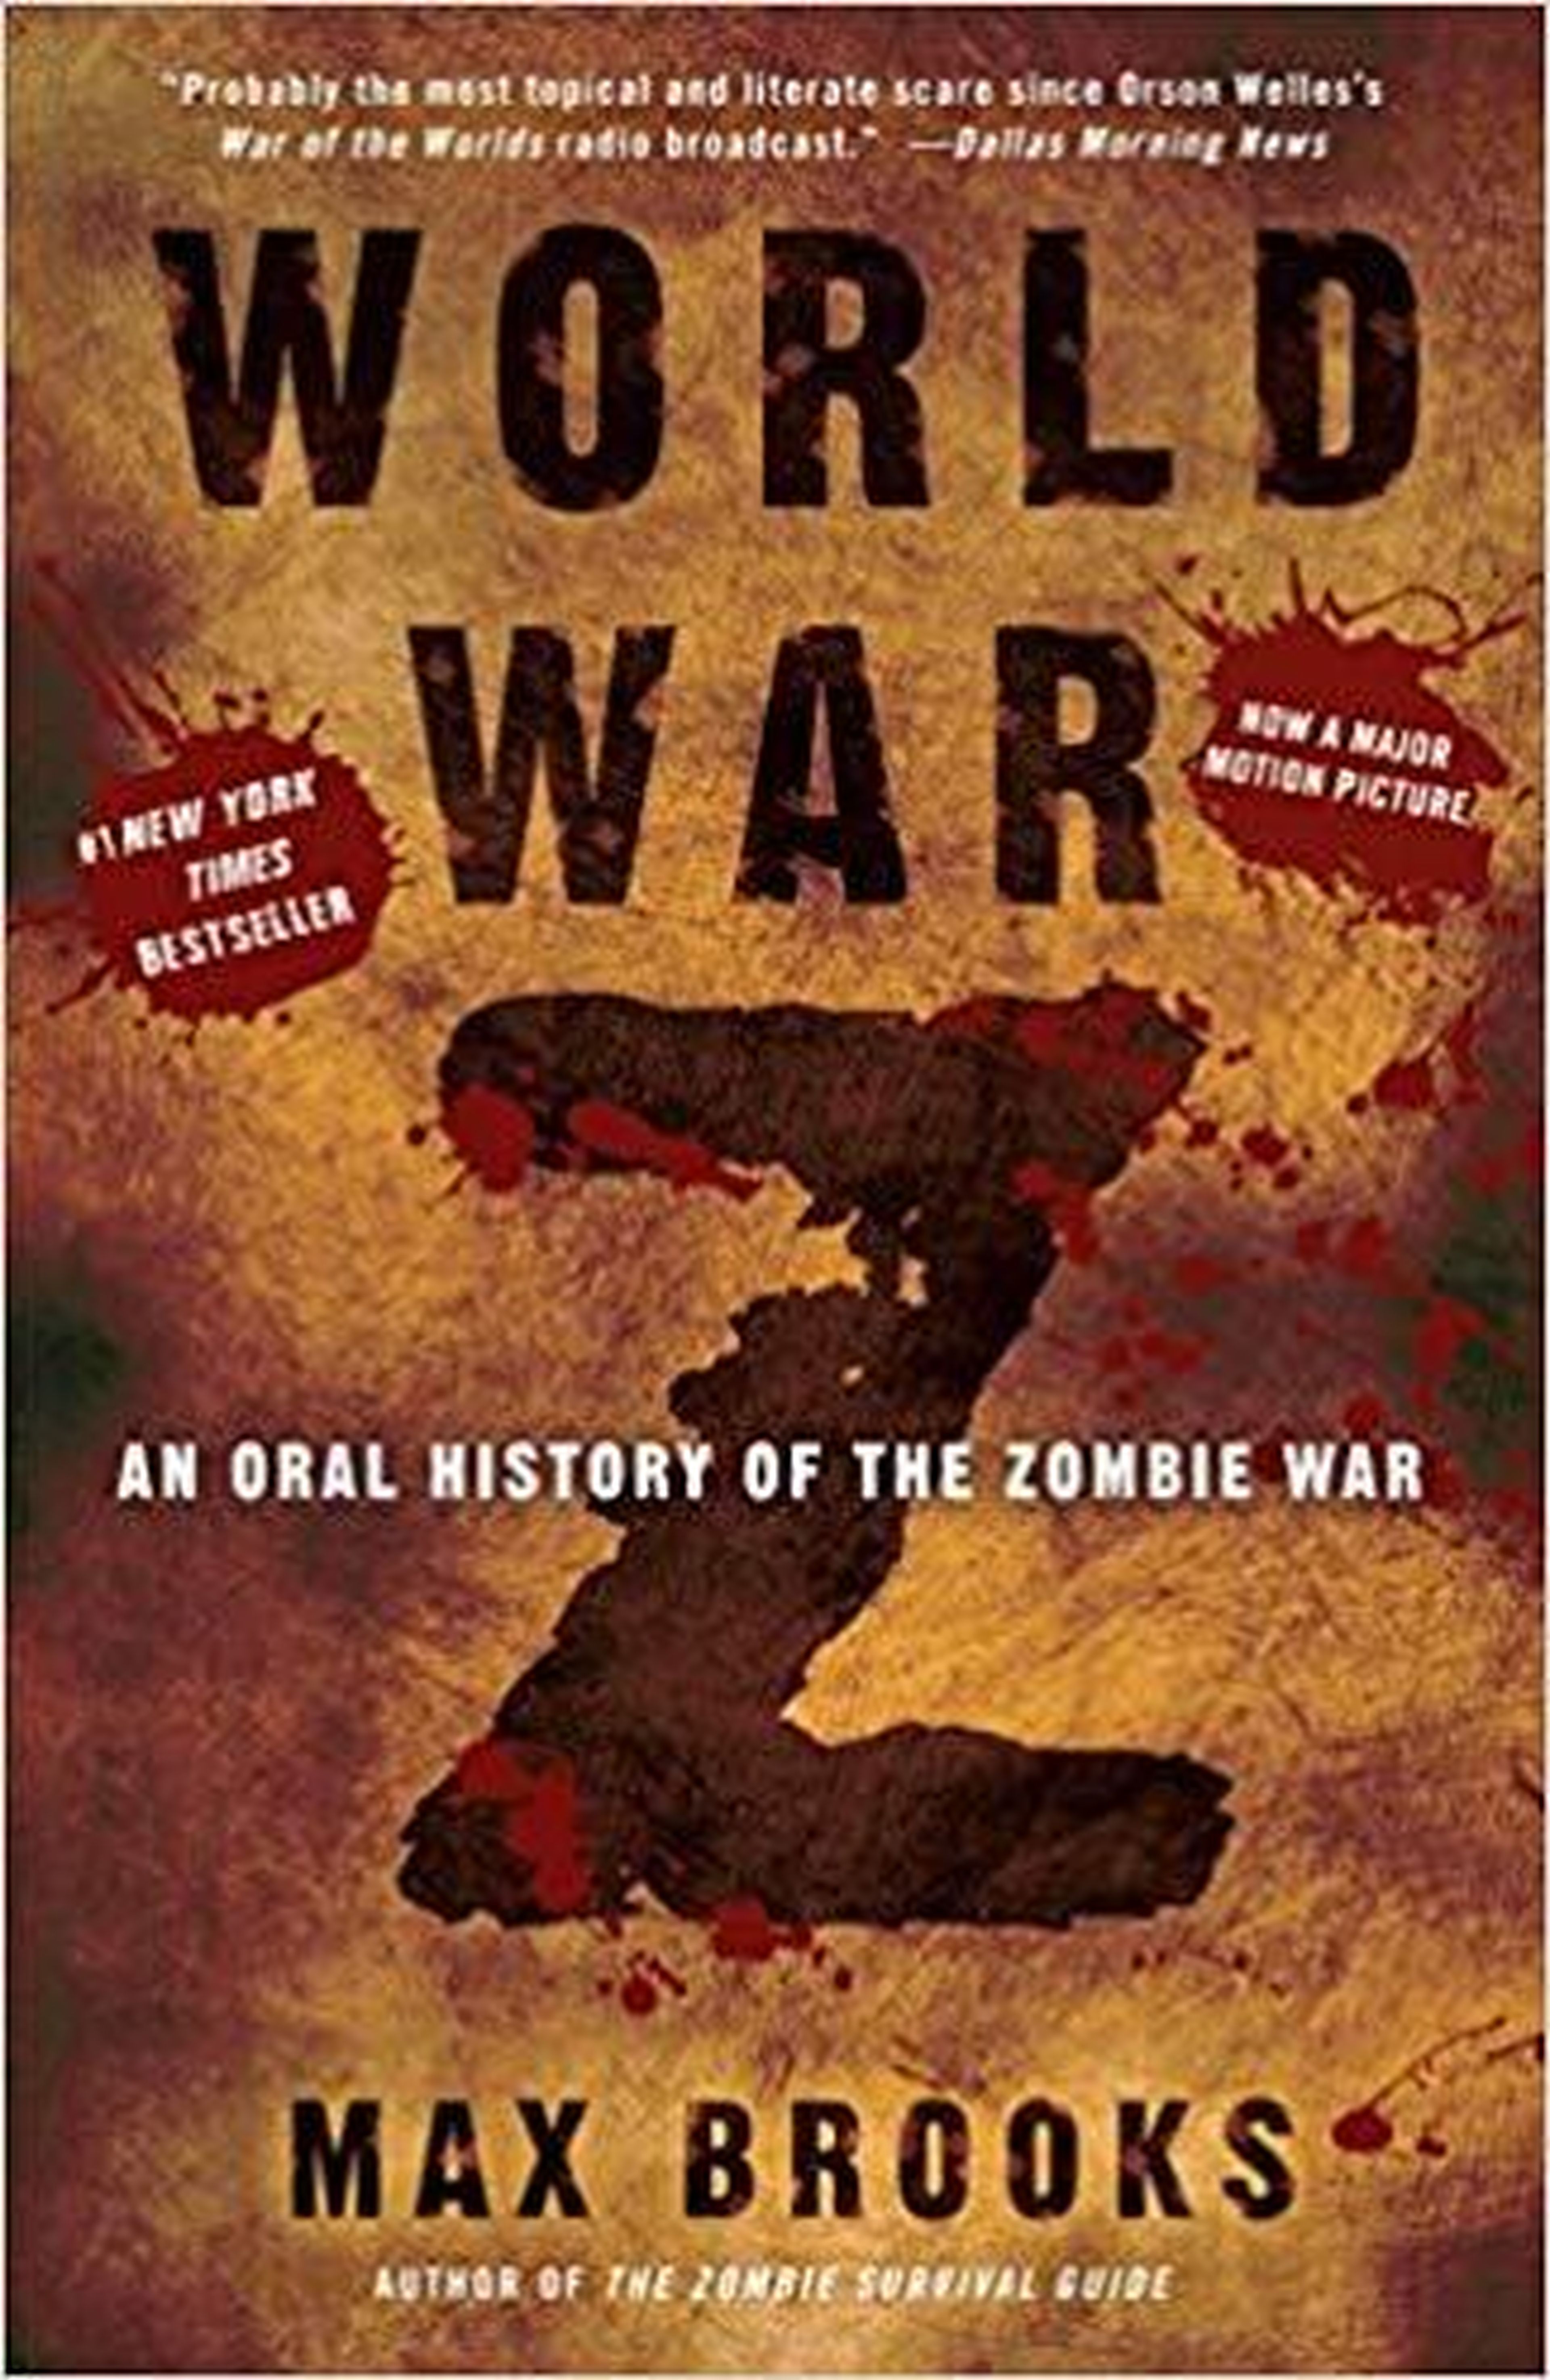 "World War Z: An Oral History of the Zombie War."